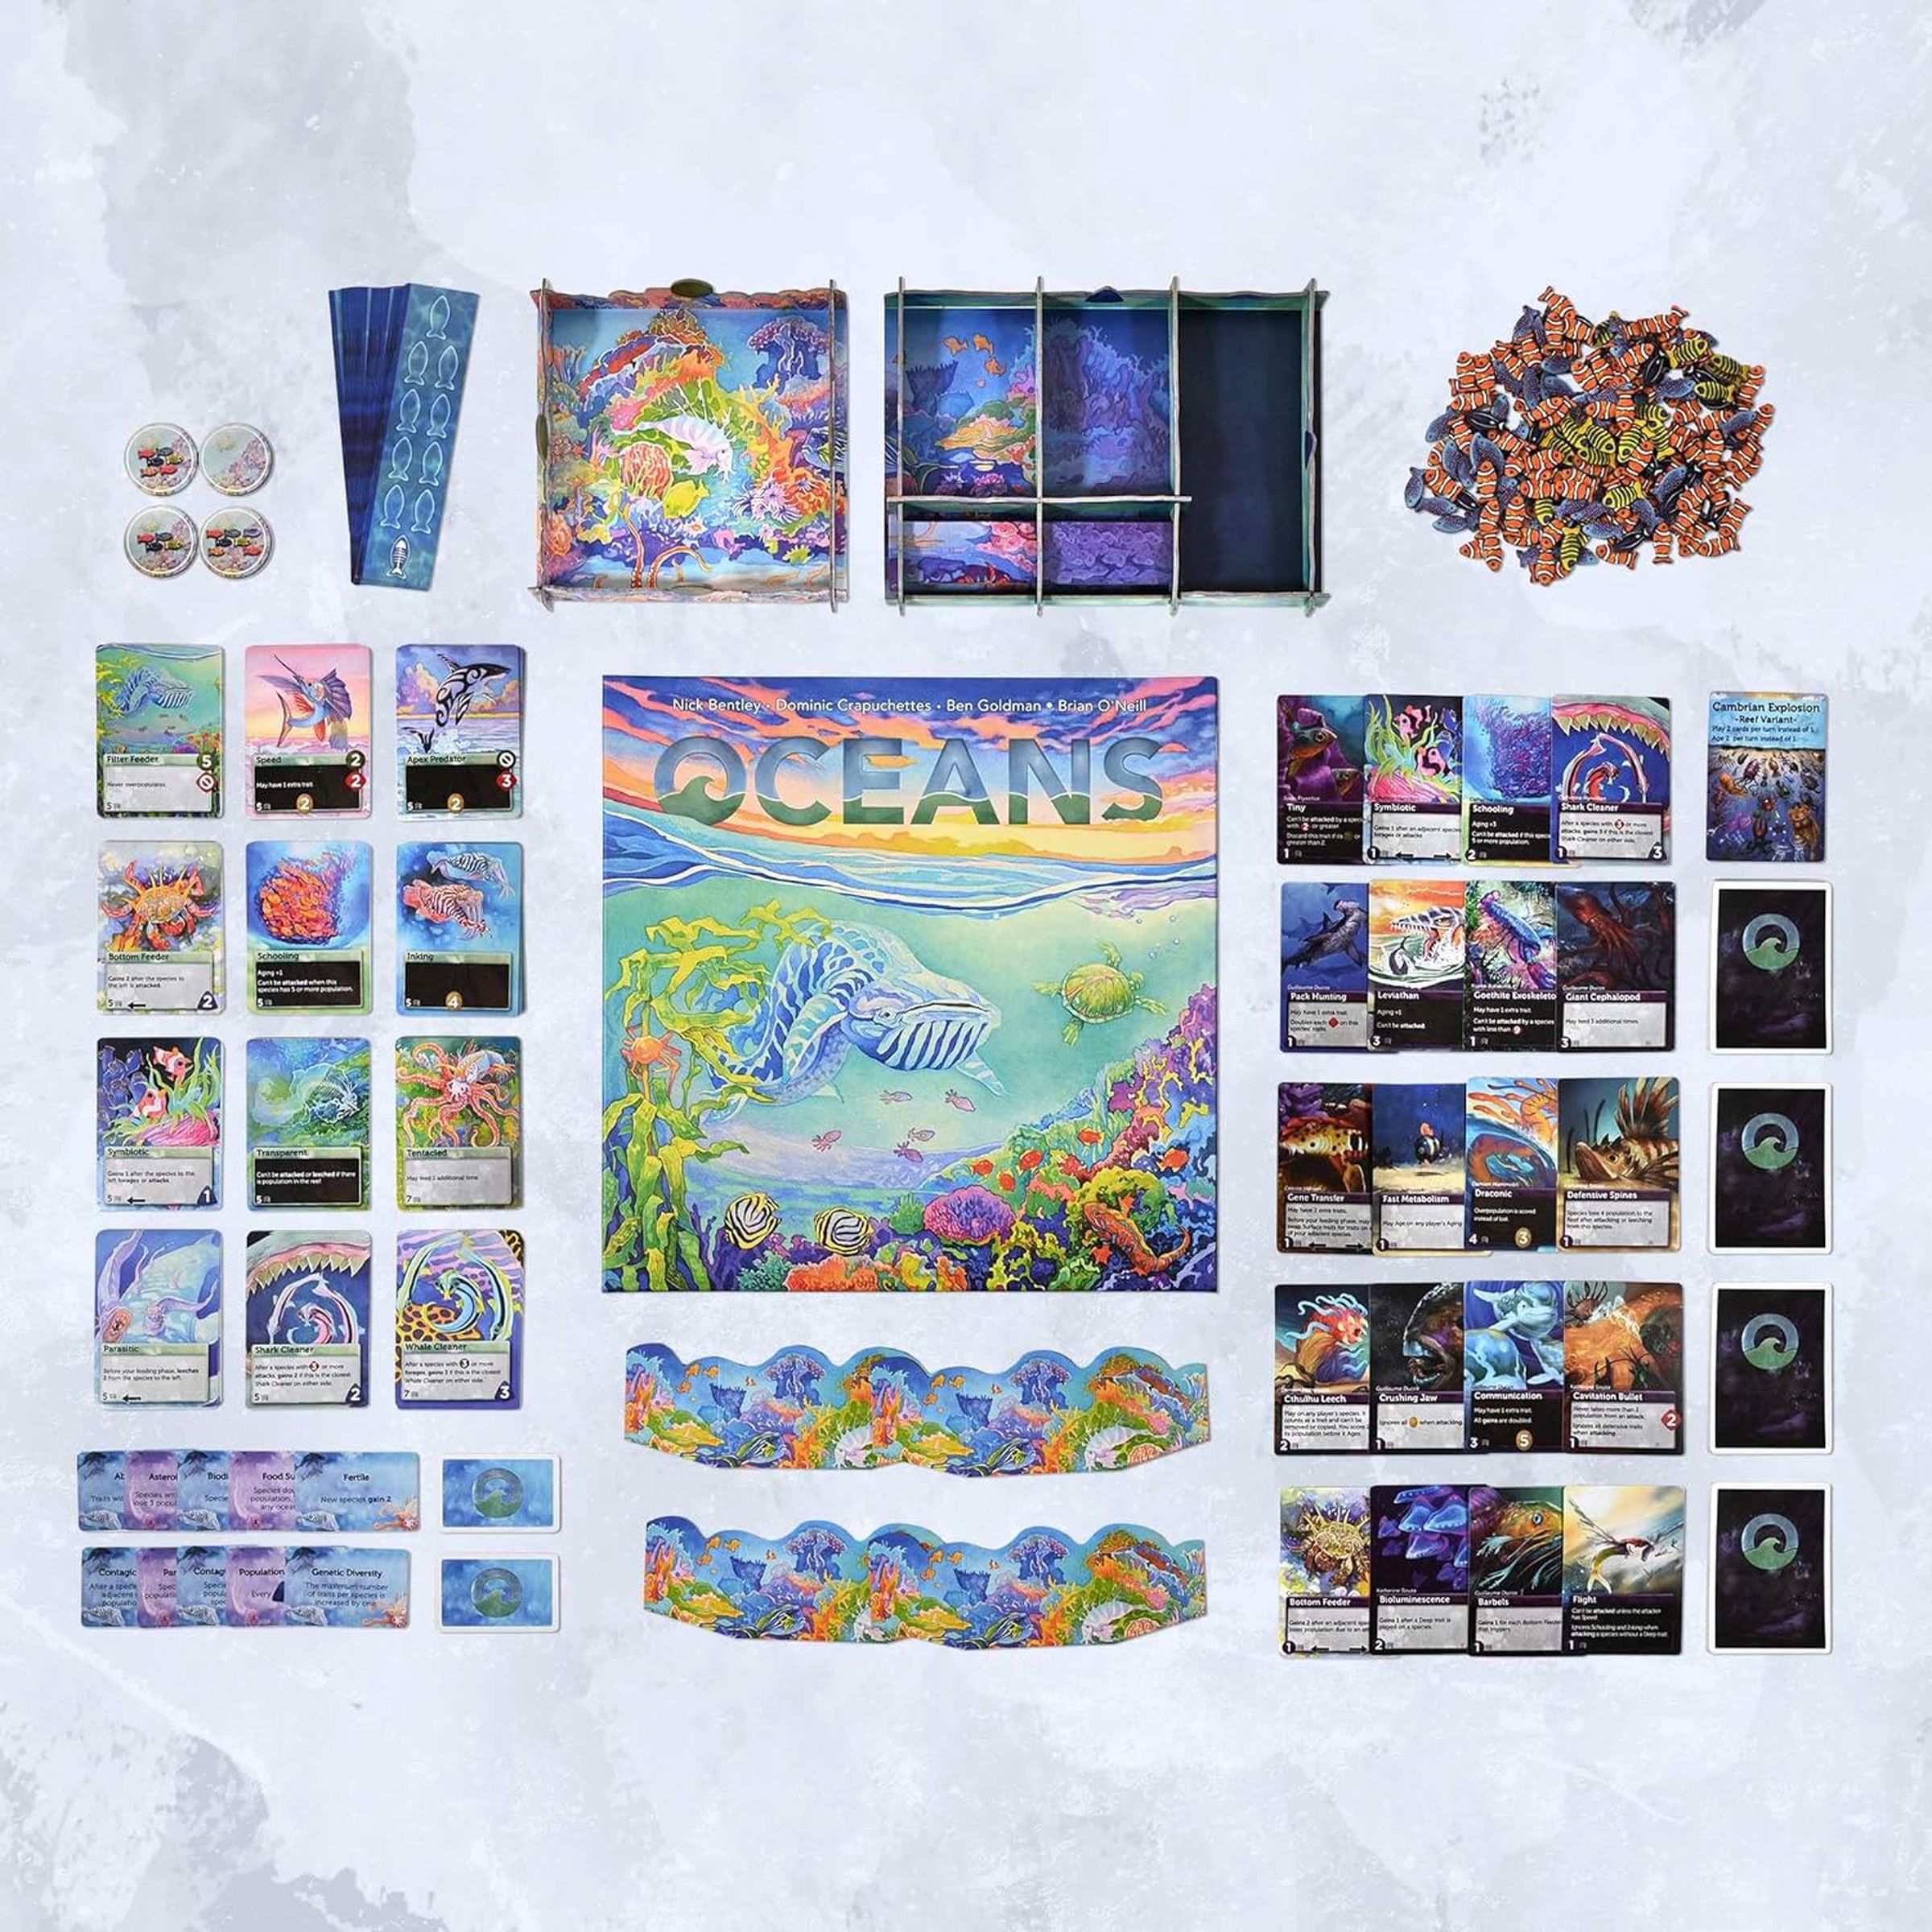 The board and cards for Evolution: Oceans.